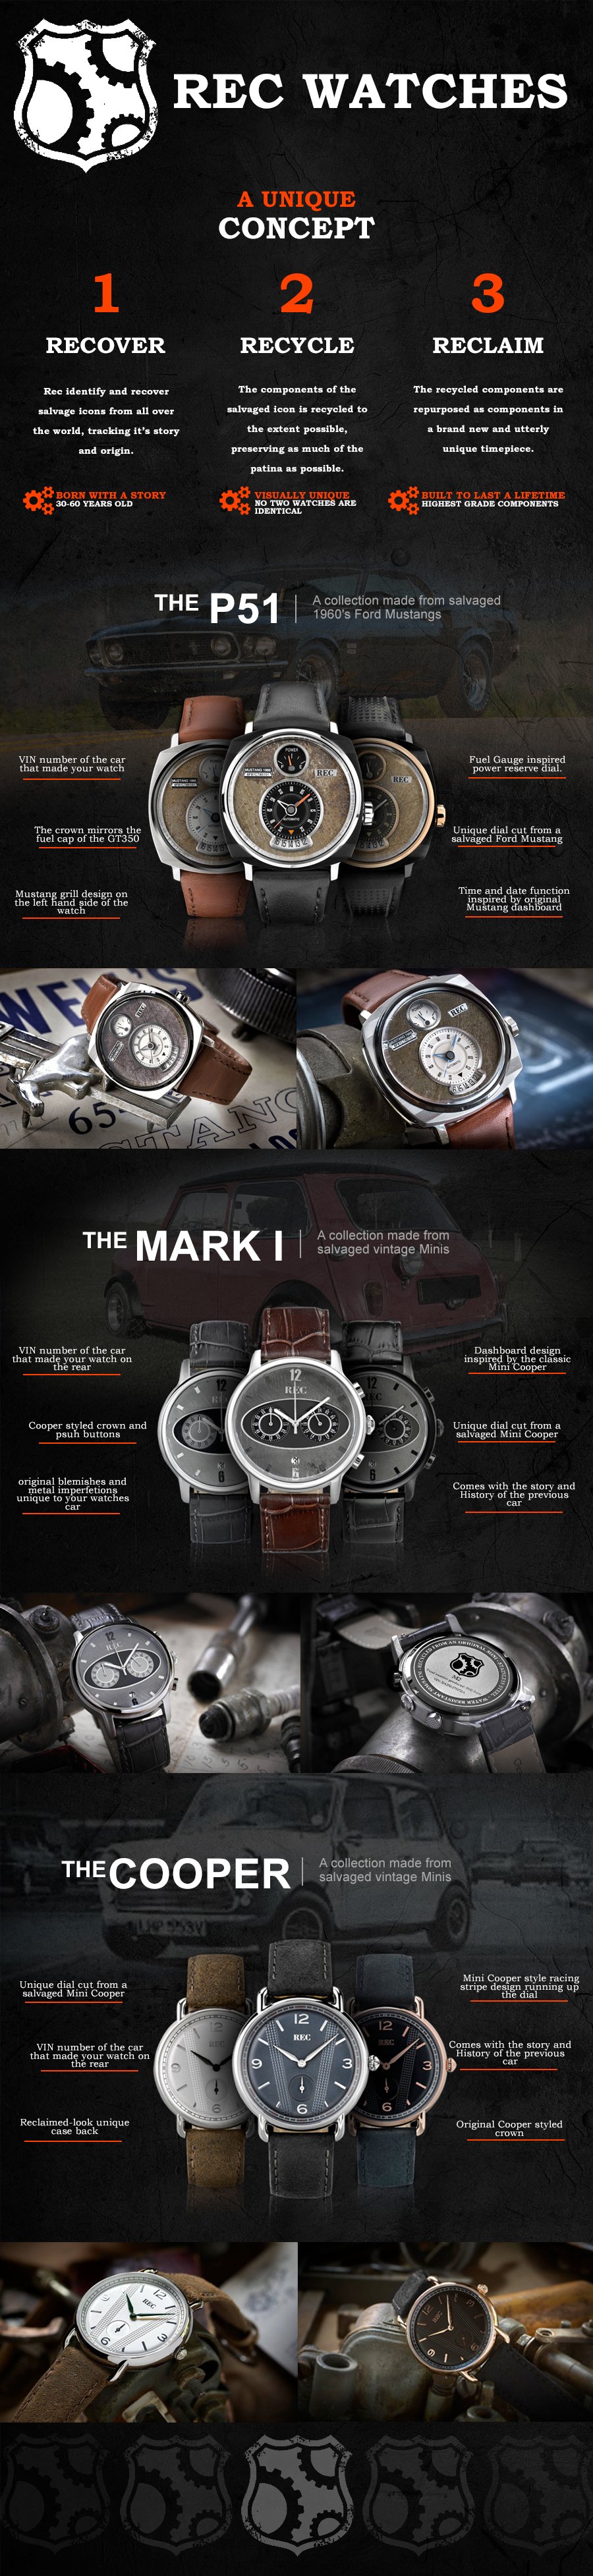 Rec Watches Infographic - First Class Watches Blog